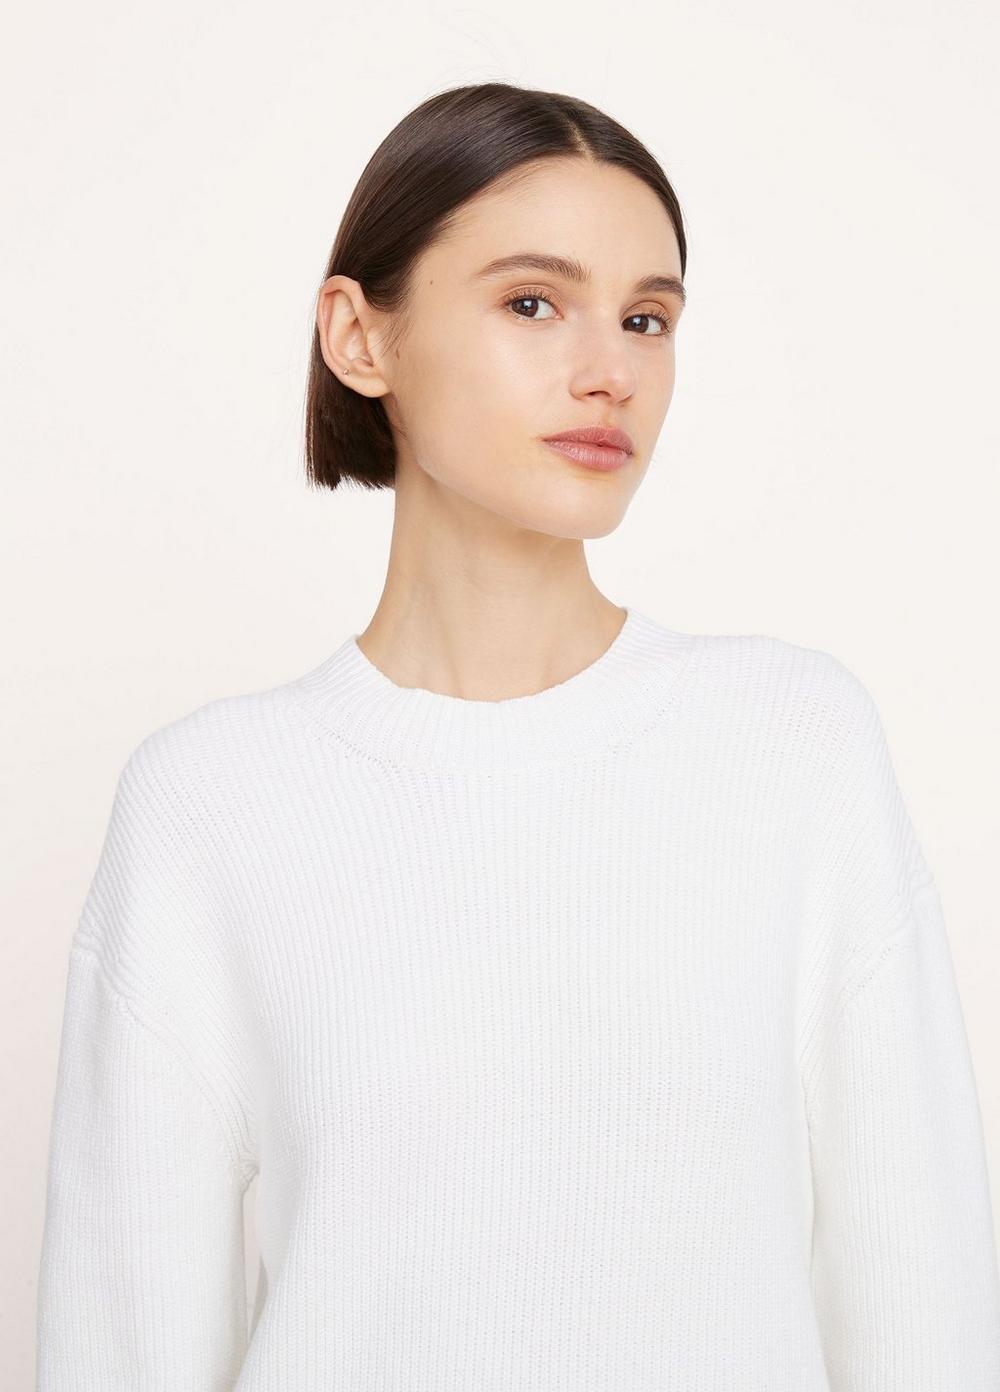 Vince | Textured Tunic Sweater in Optic White | Vince Unfold